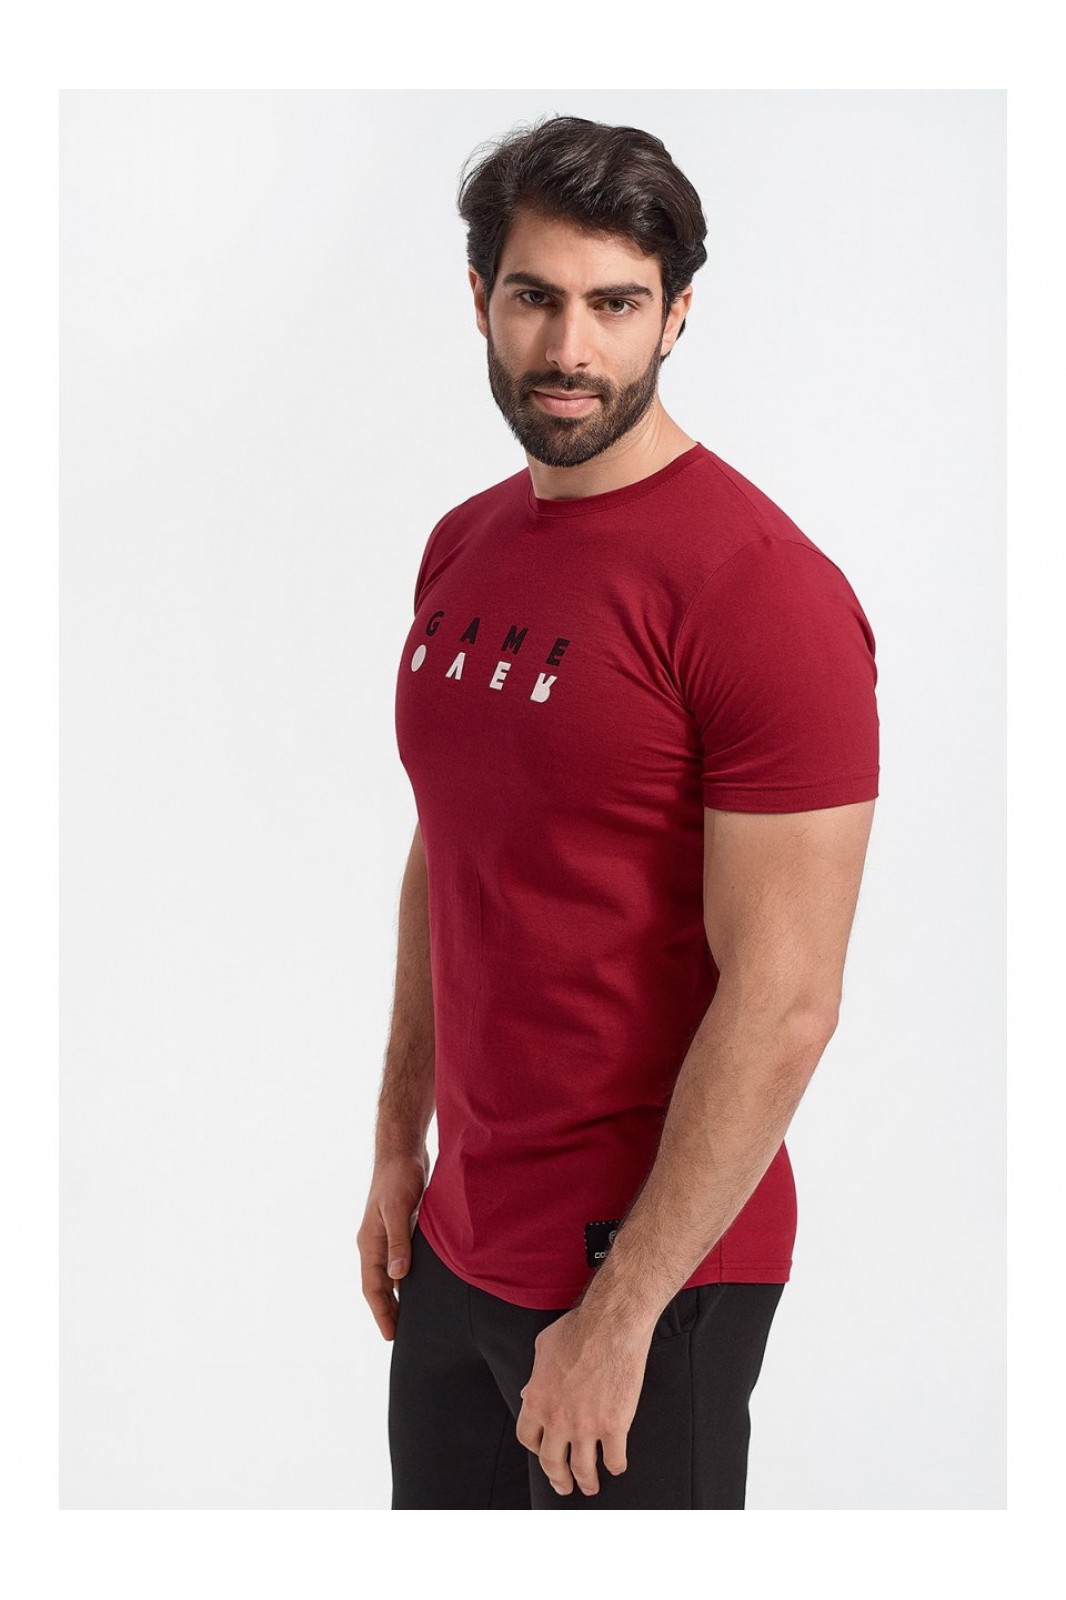 COTTON4ALL Mens T-Shirt GAME OVER burgundy